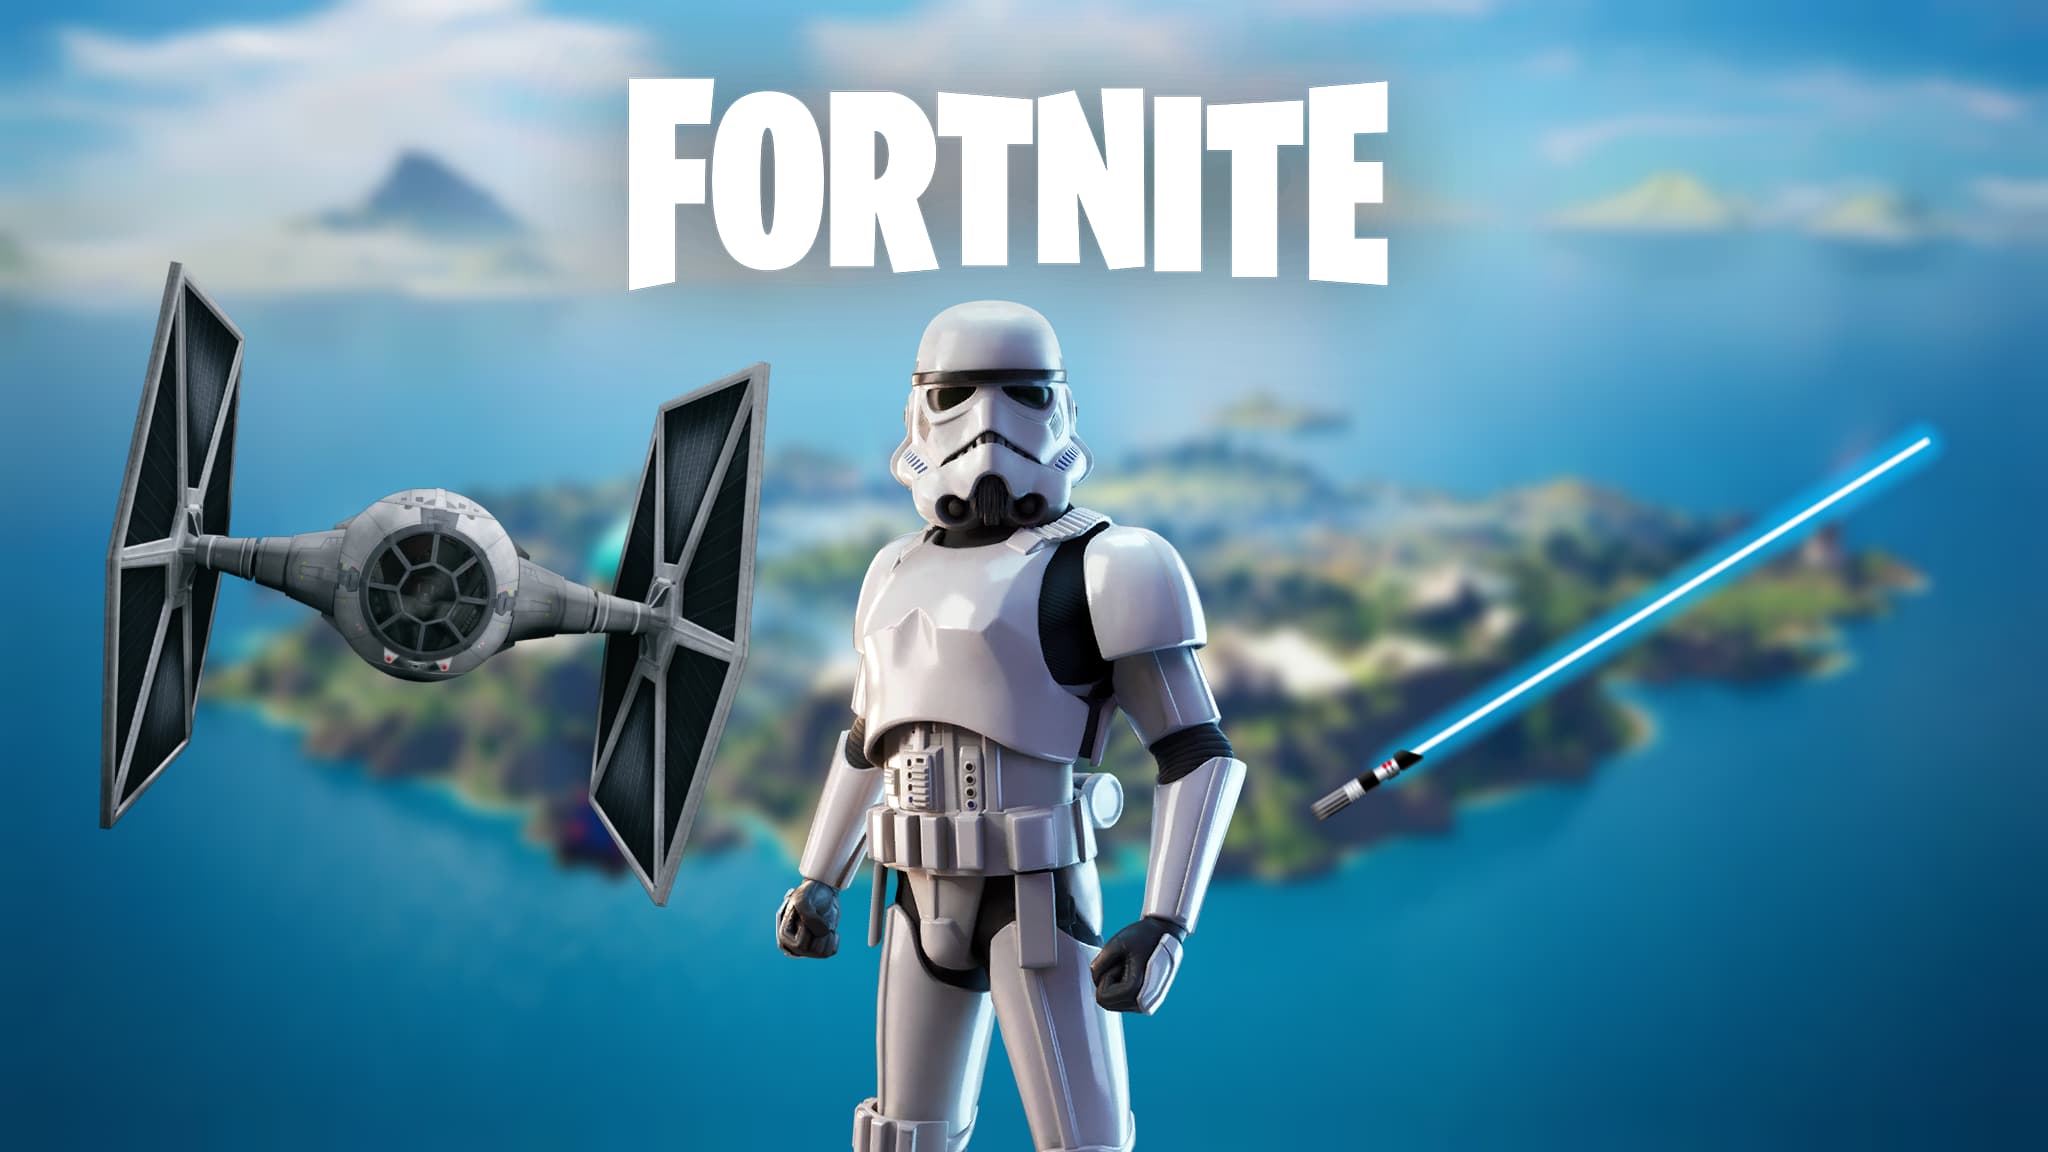 Fortnite X Star Wars leaks: everything we know